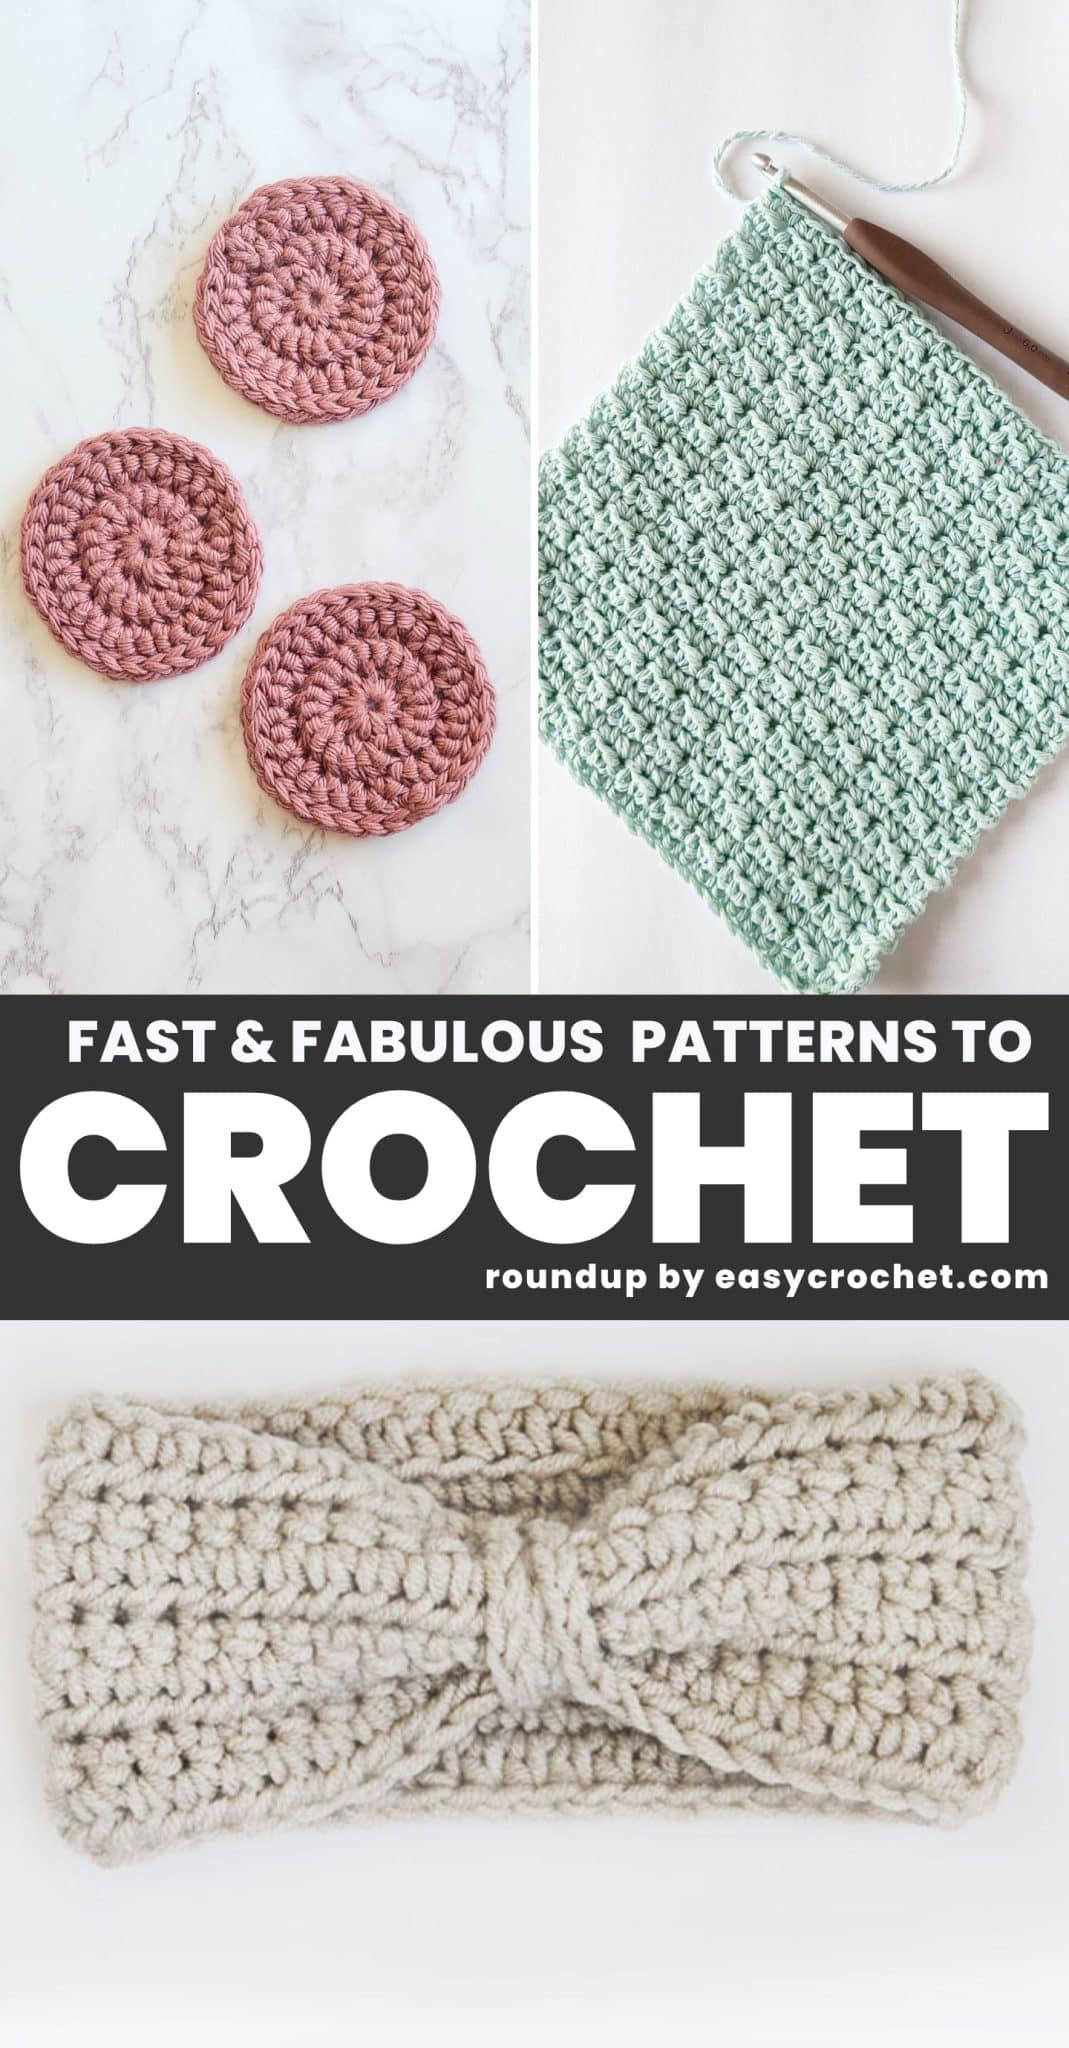 Fast Crochet Patterns and Projects